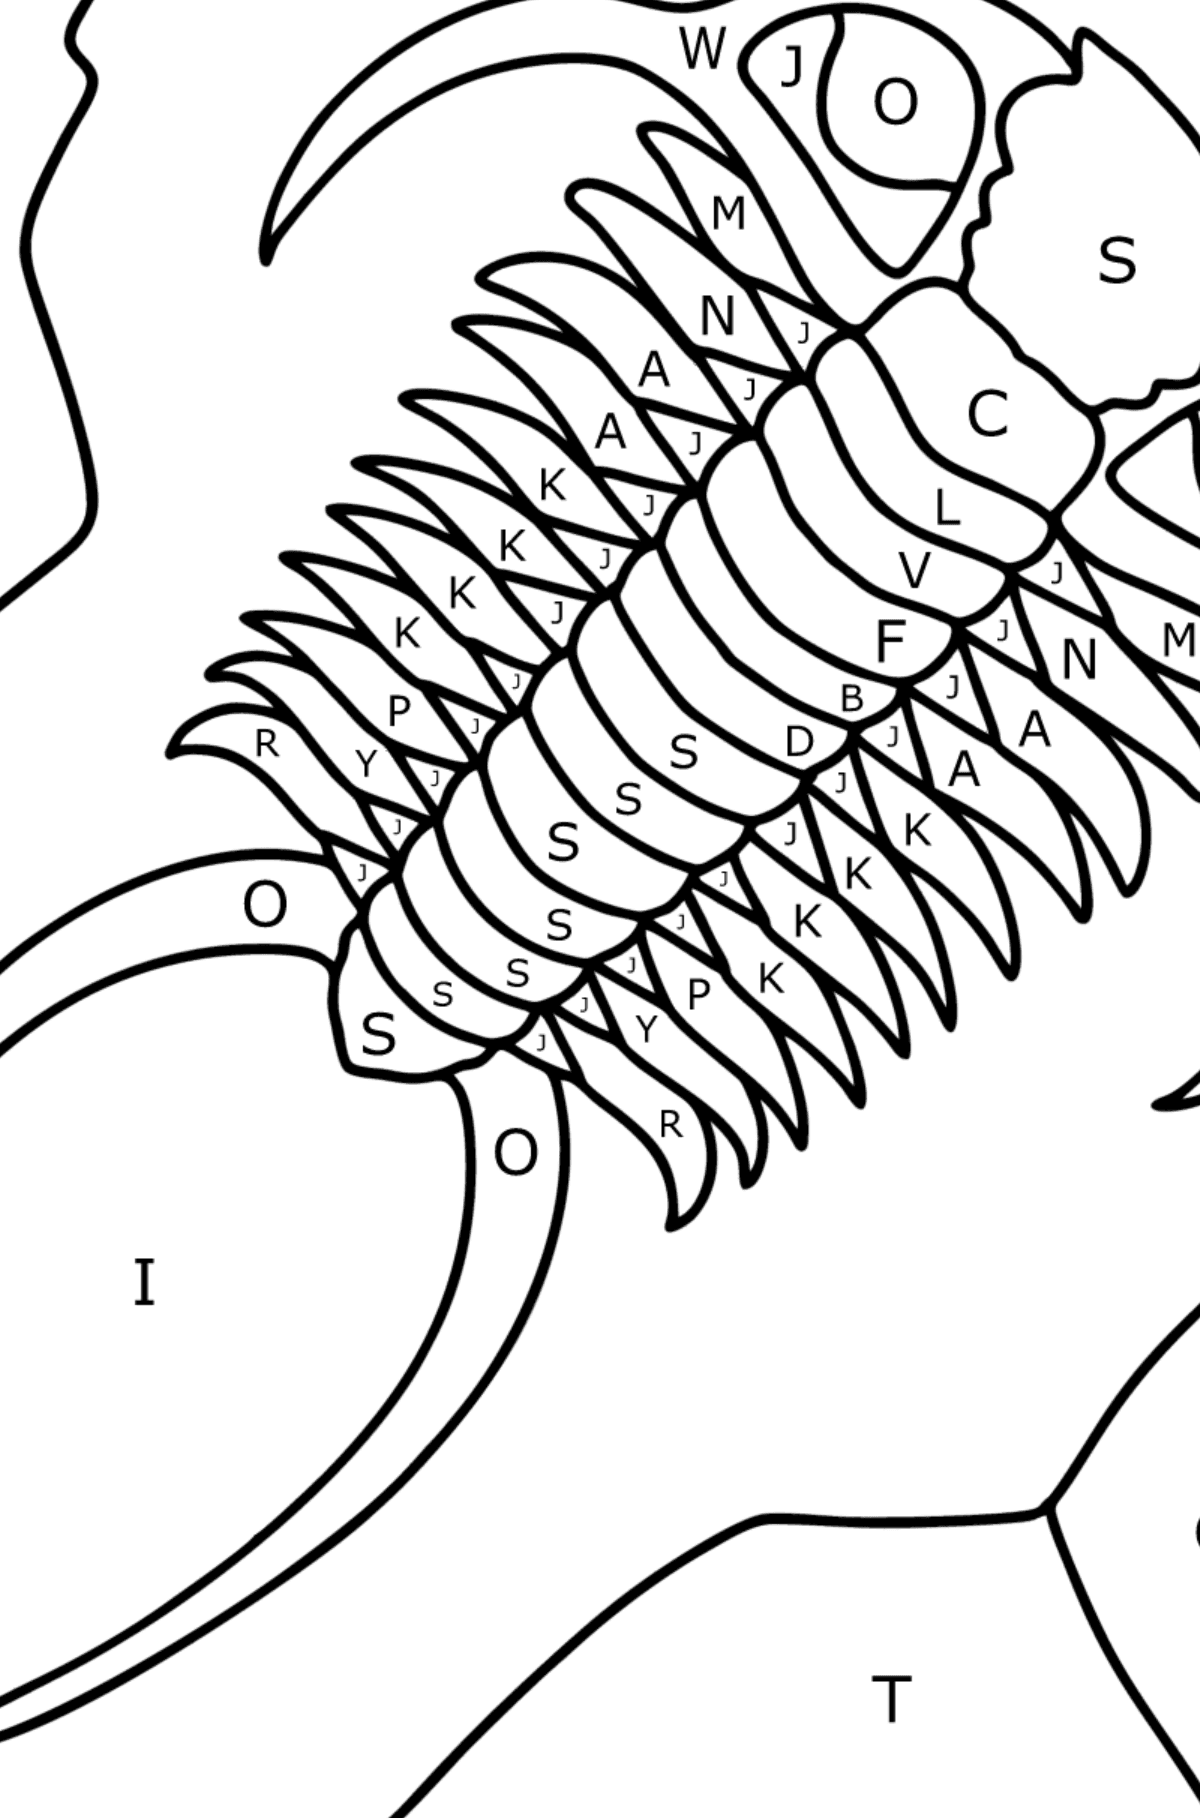 Sea Fossil coloring page - Coloring by Letters for Kids